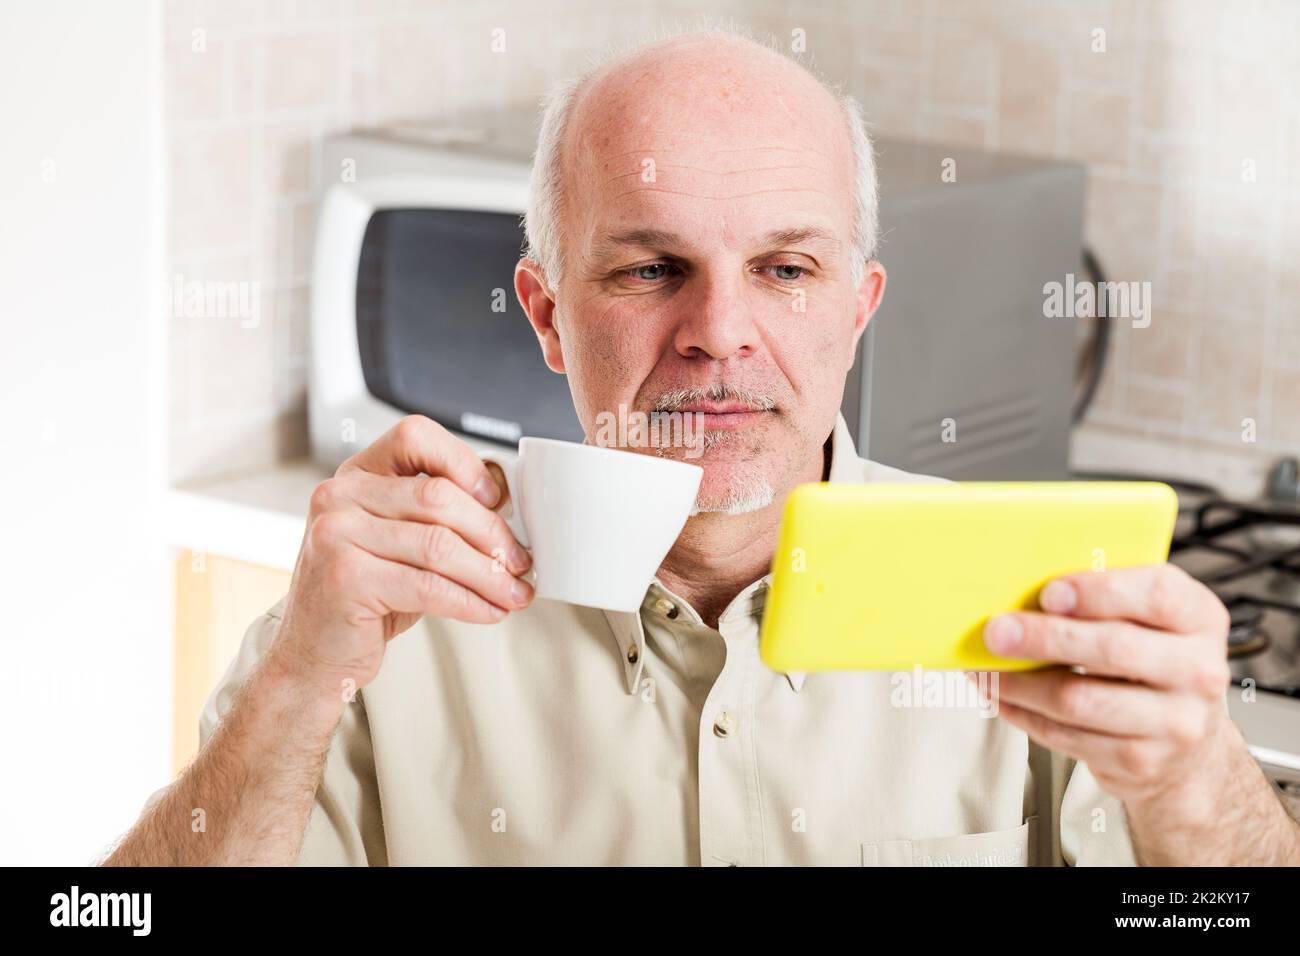 Handsome bearded mature man near microwave oven Stock Photo